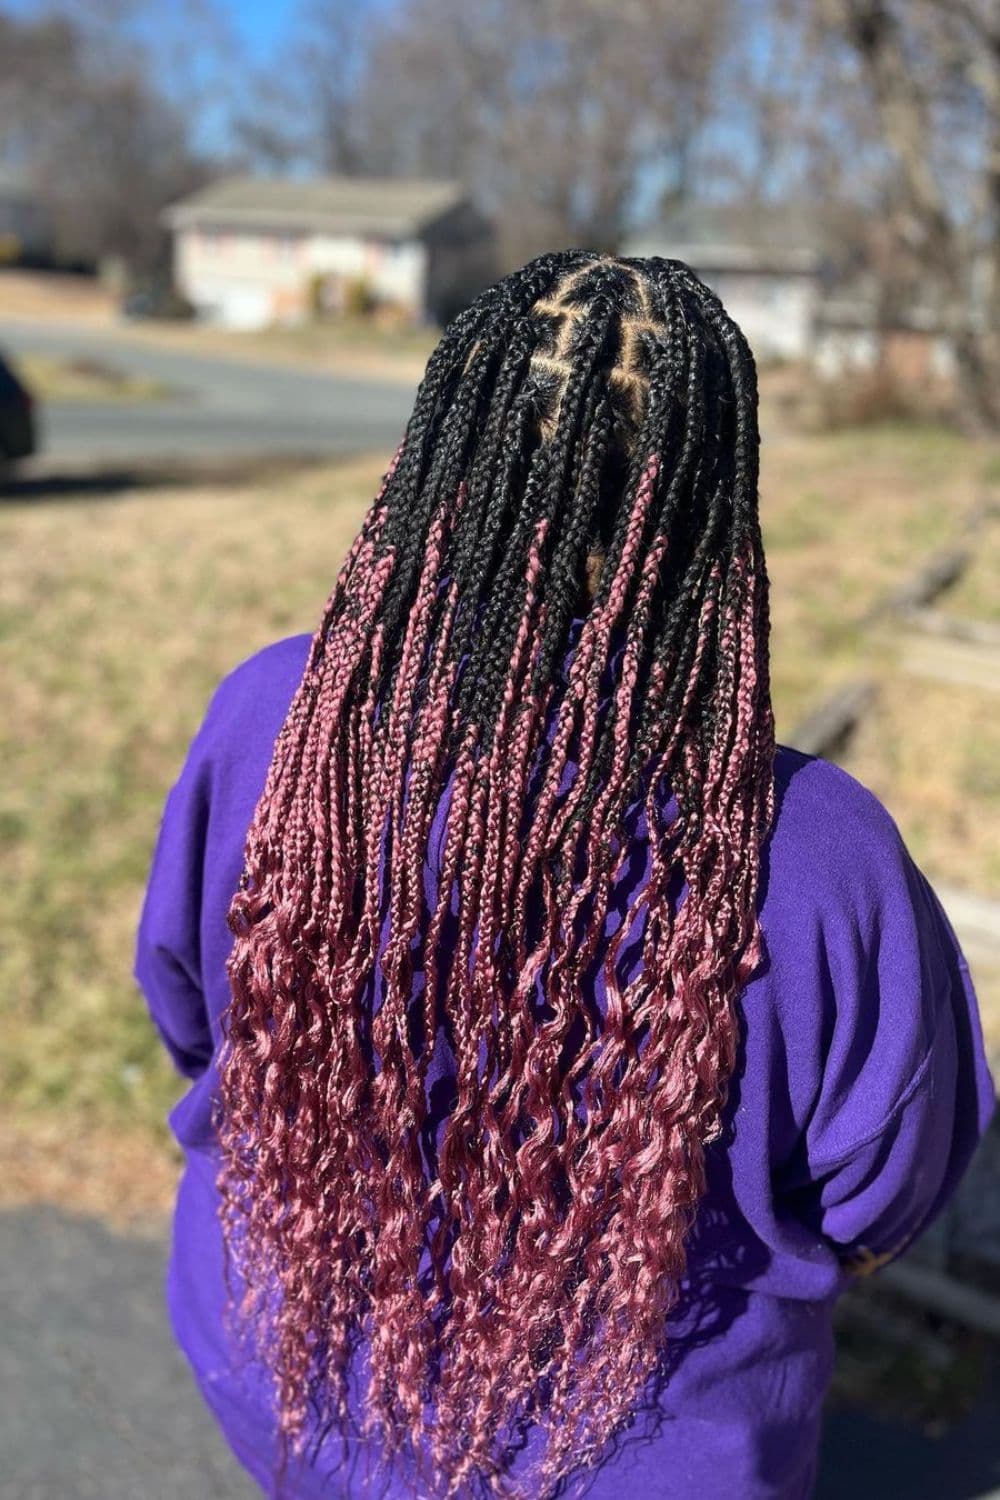 A woman in a purple sweater with black and burgundy two-toned braids with curly ends.